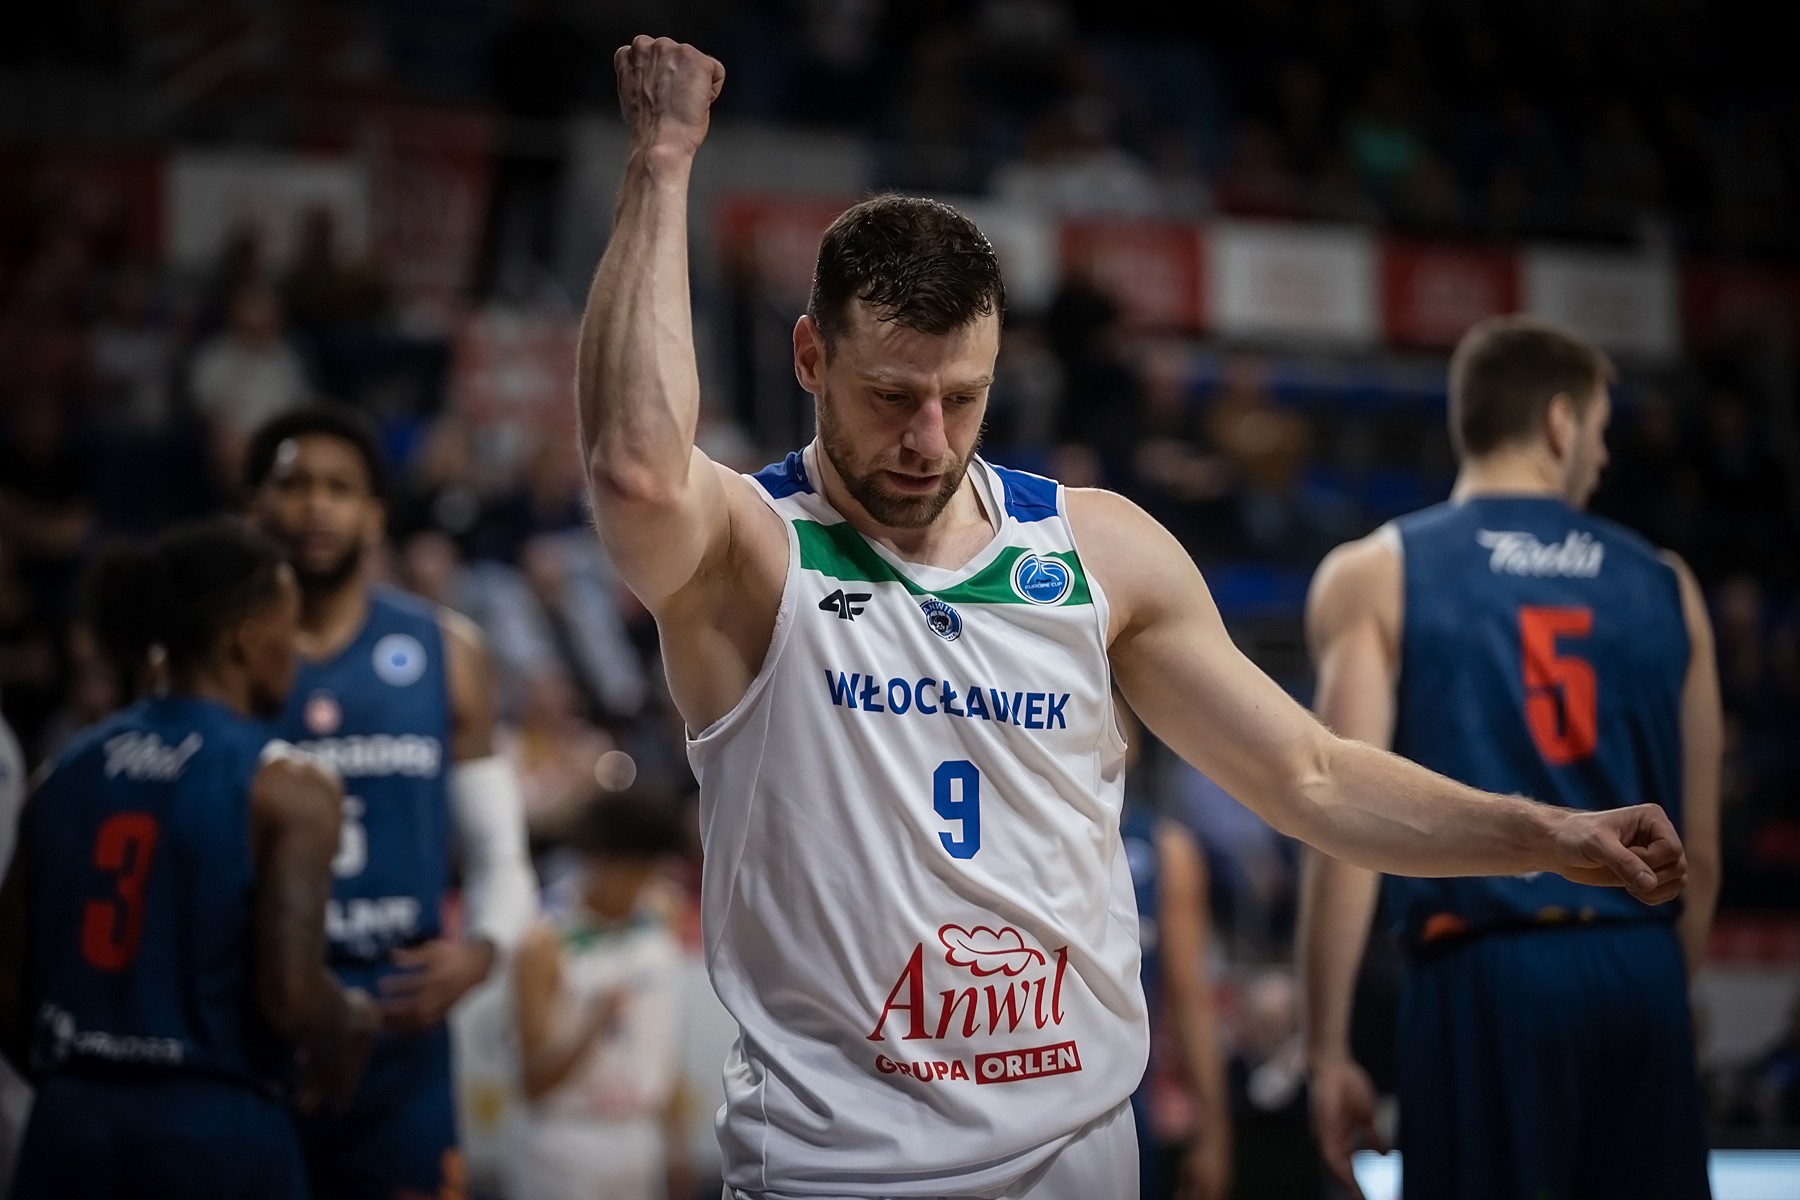 Quarterfinals for Anwil! The Rottweilers better than the Romanians!